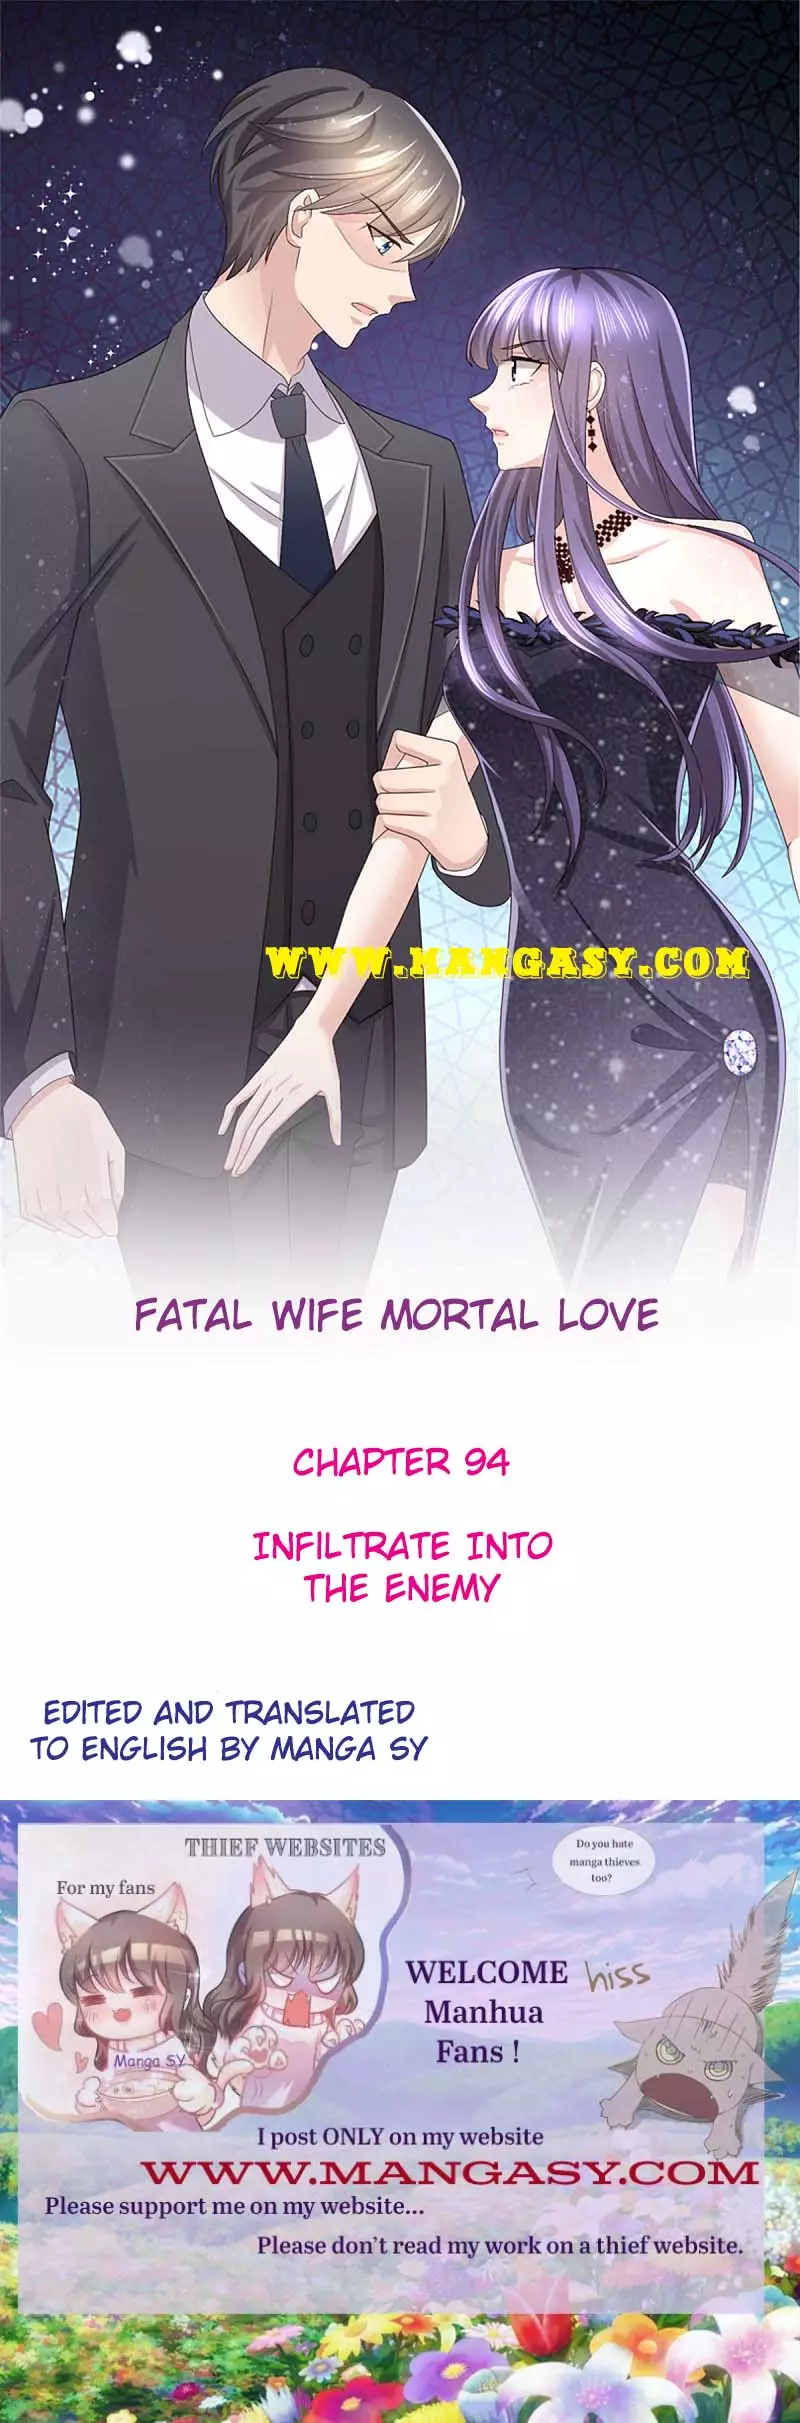 A Deadly Sexy Wife: The Ceo Wants To Remarry - 94 page 1-6d585b1d